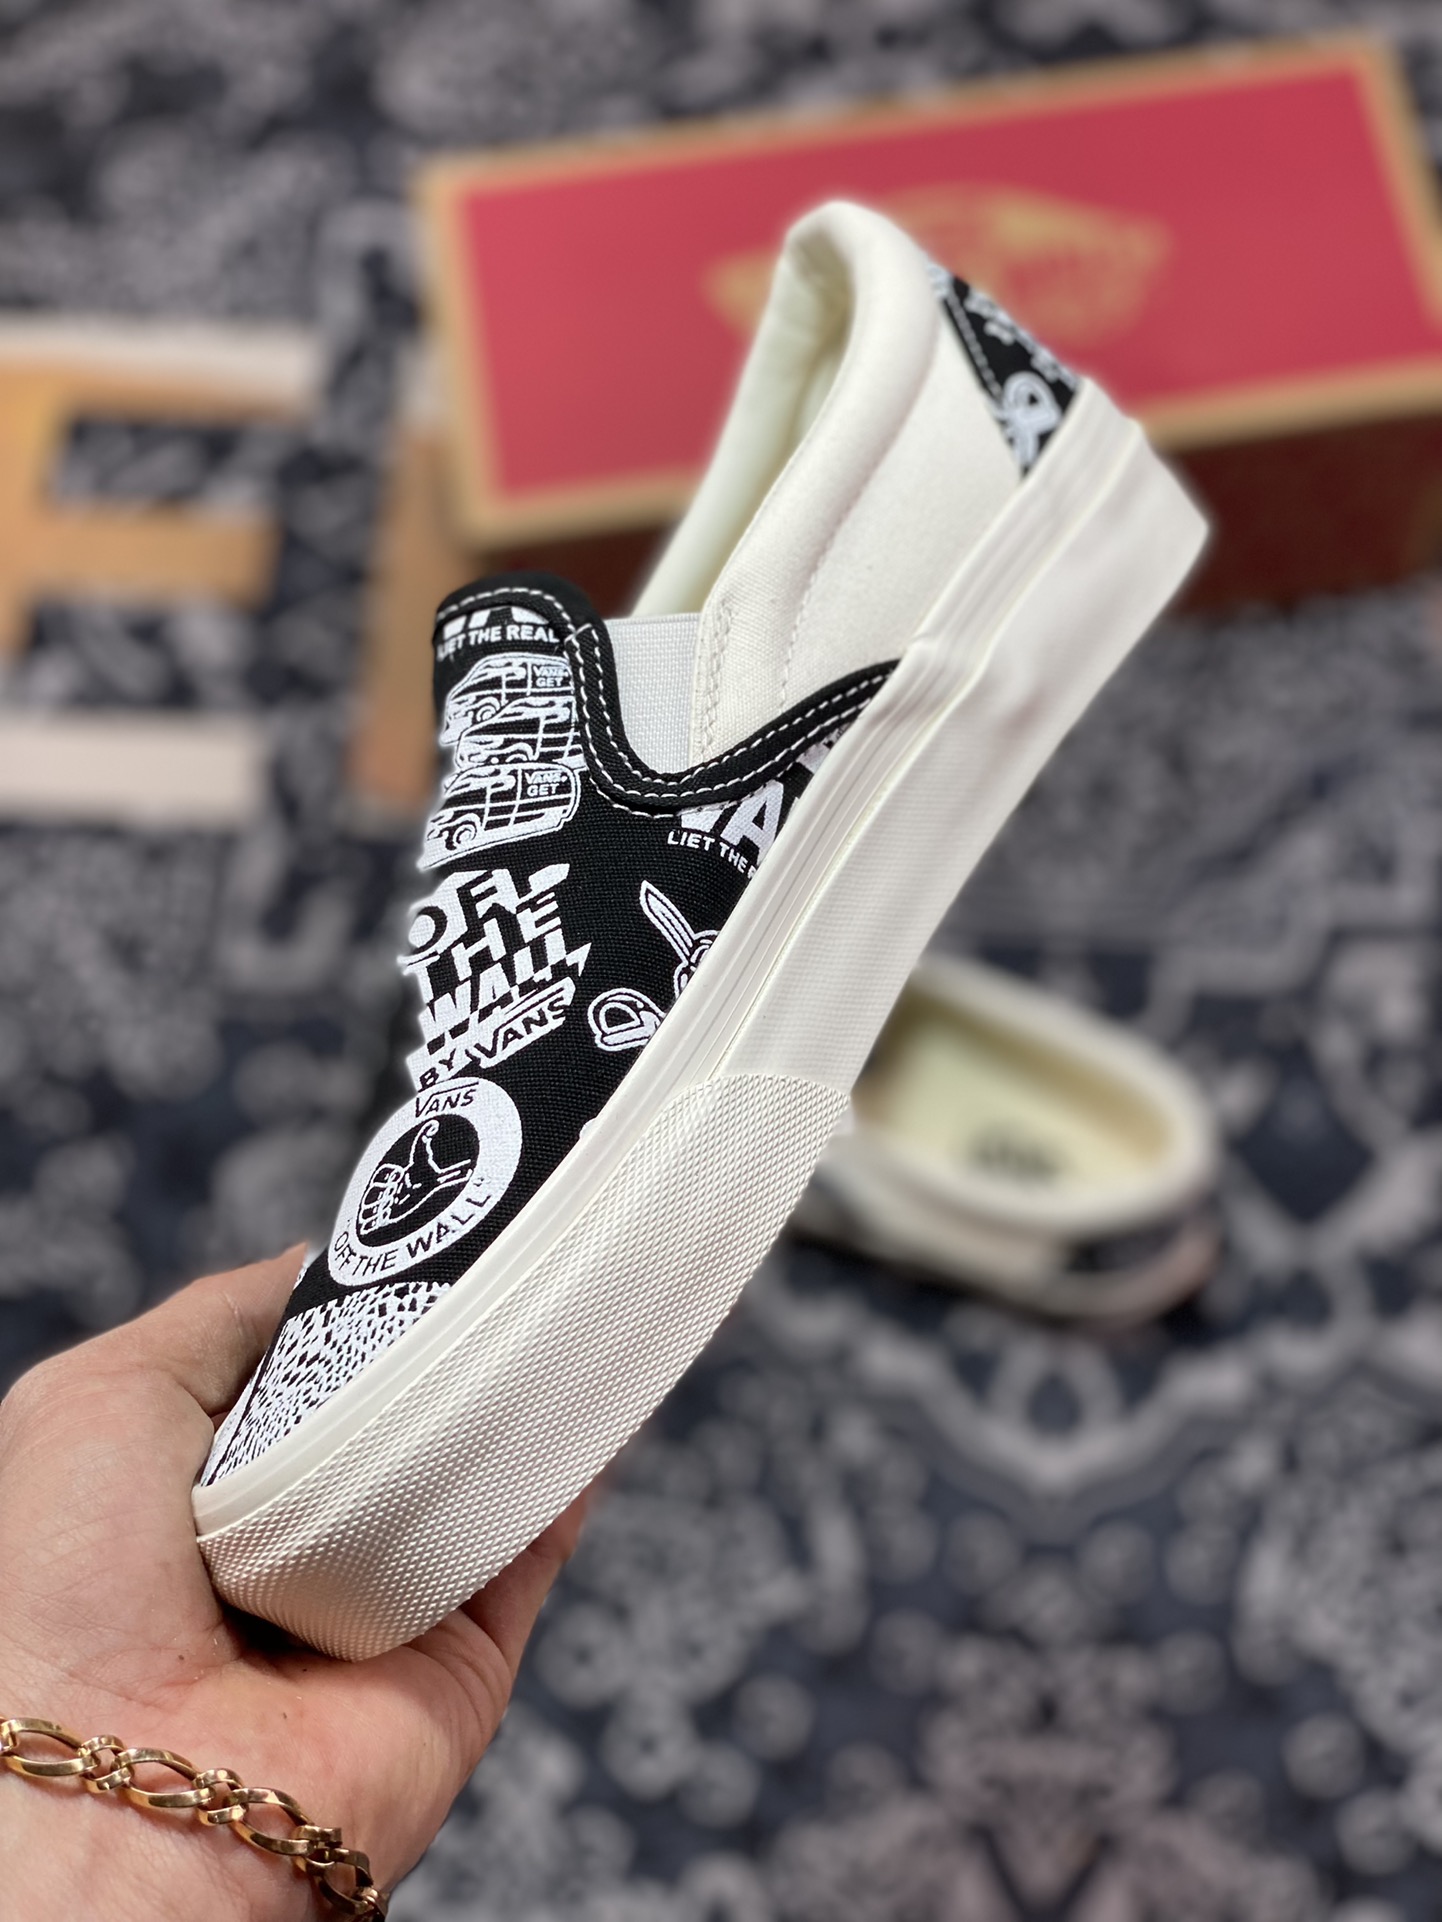 Vans Anaheim Factory Slip-On official black and white graffiti canvas shoes